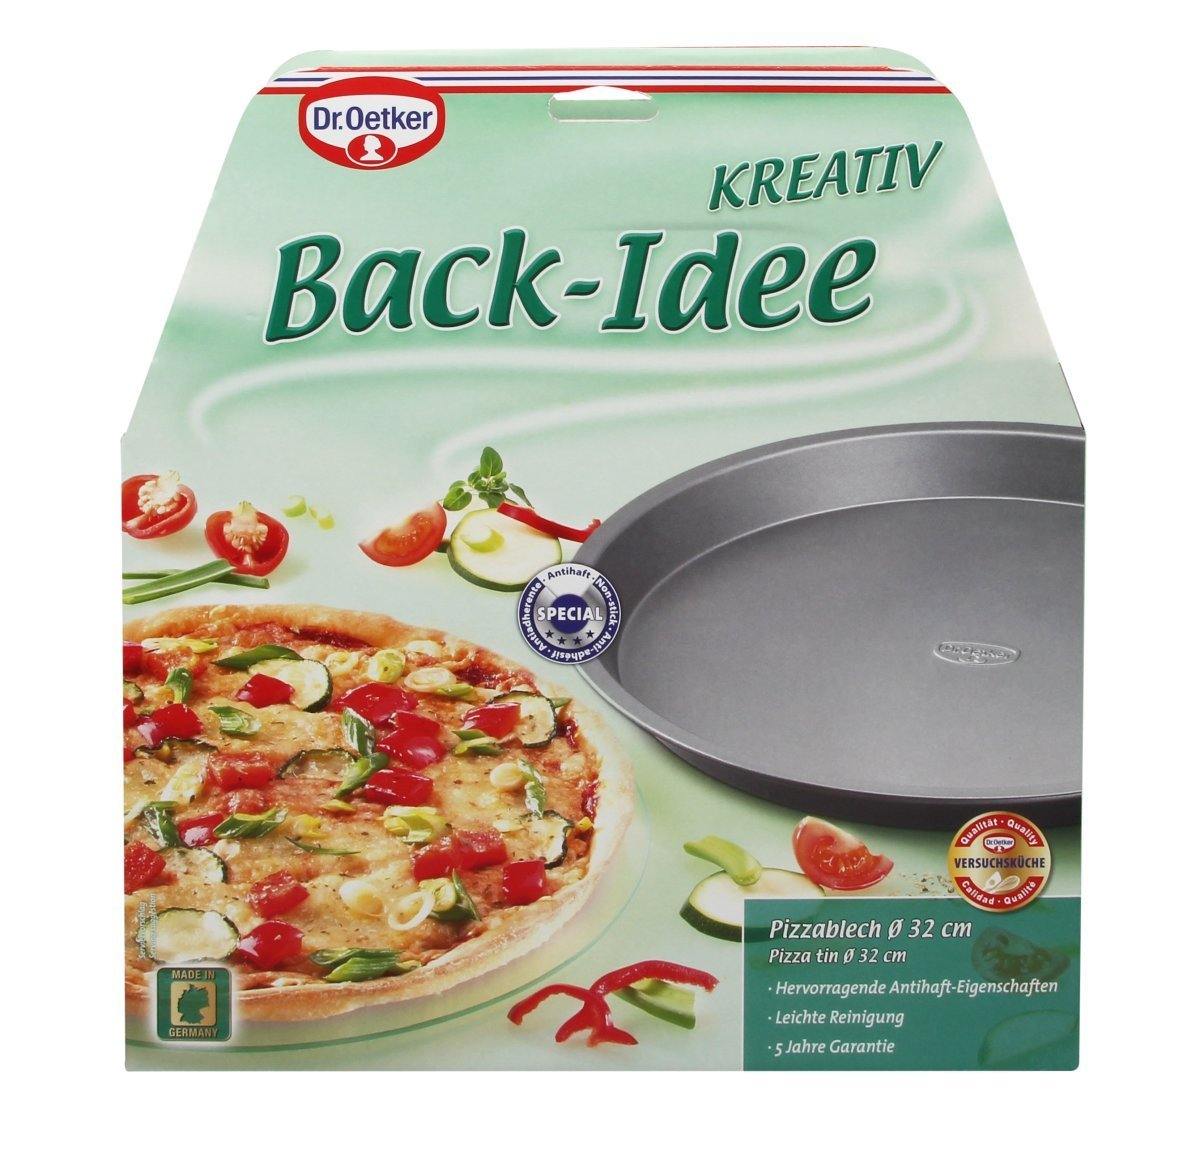 Dr. Oetker "Back-Idee" Pizza Tray, Black, 32X3.5 cm - Whole and All